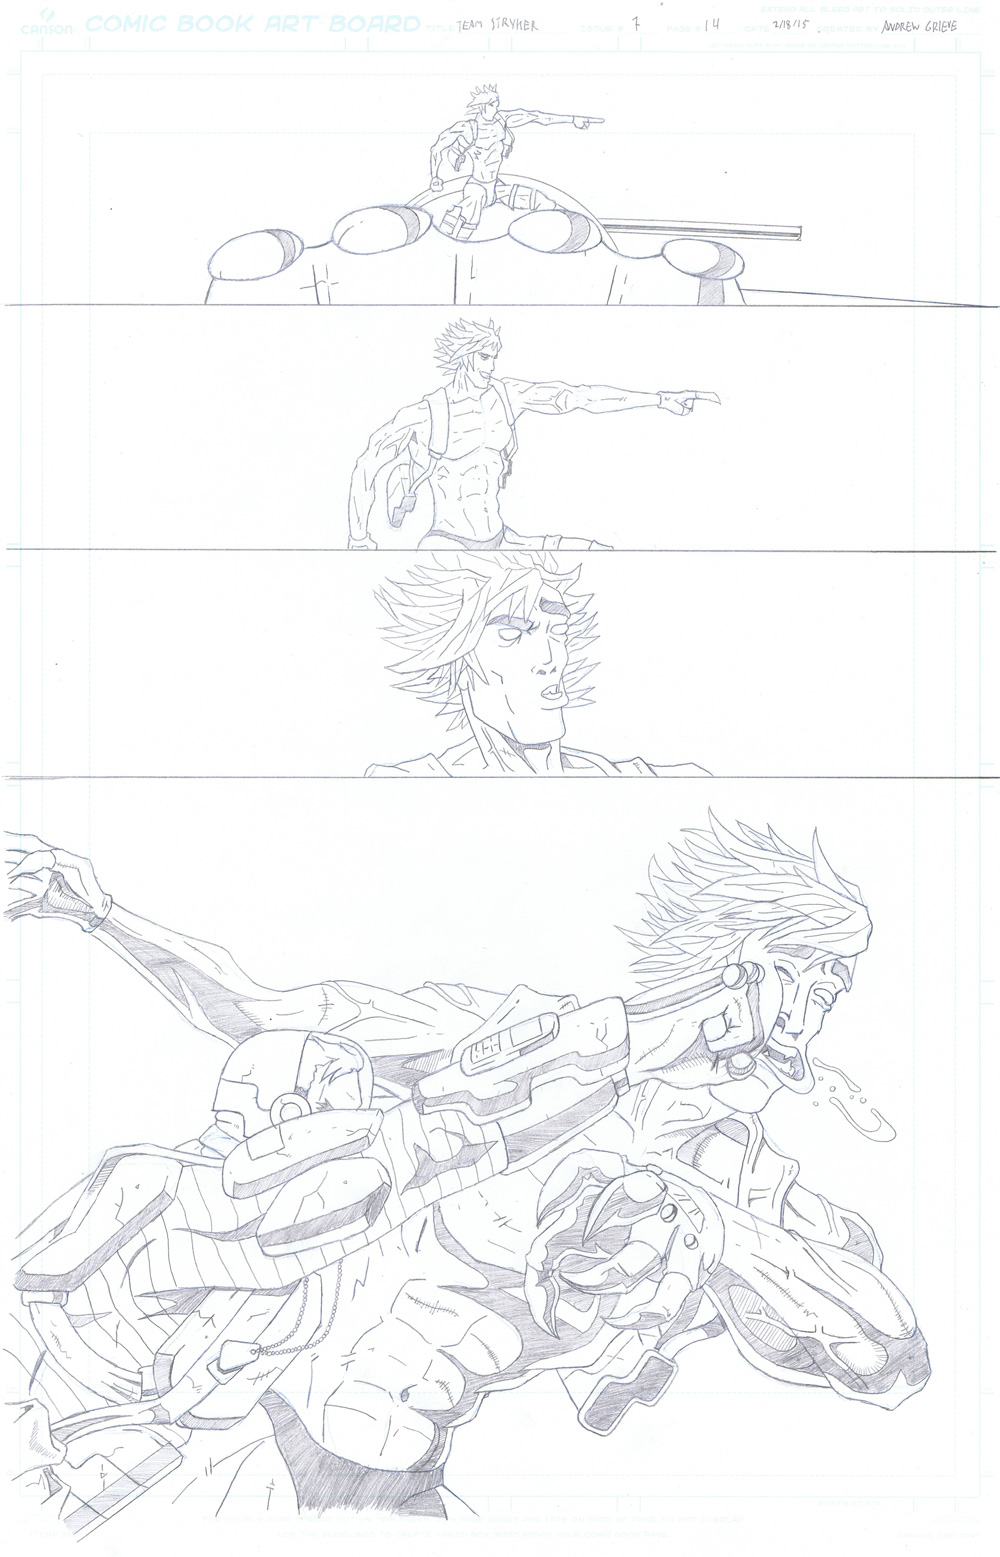 MISSION 007: PAGE 14 PENCIL